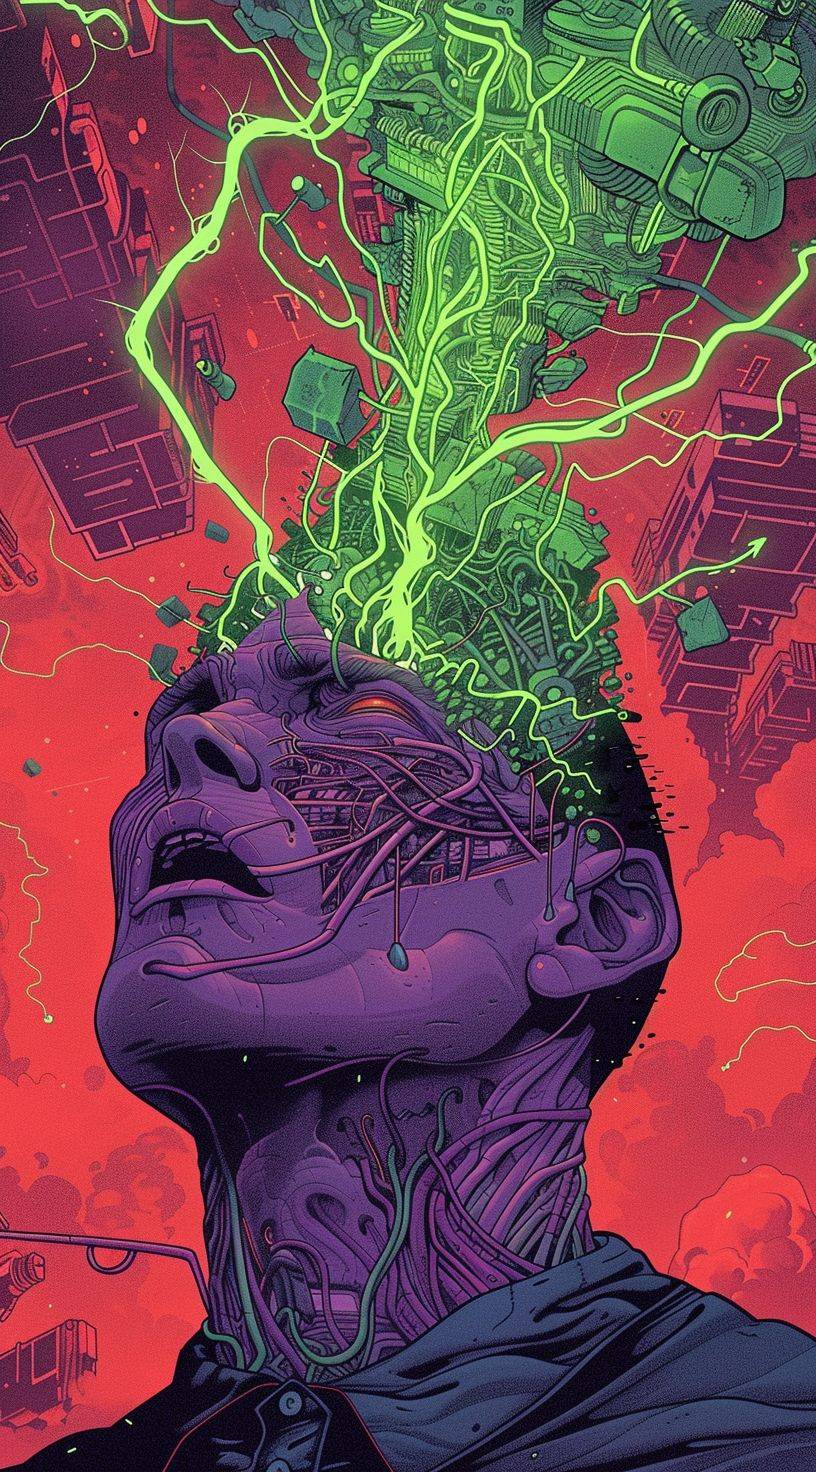 the head of in a red environment, with electricity lines coming from his head, and his head, in the style of interstellar comic book art, purple and green, hyper-detailed illustrations, dan mumford, josan gonzalez, trompe-l'œil illusionistic detail, cybersteampunk --ar 62:111